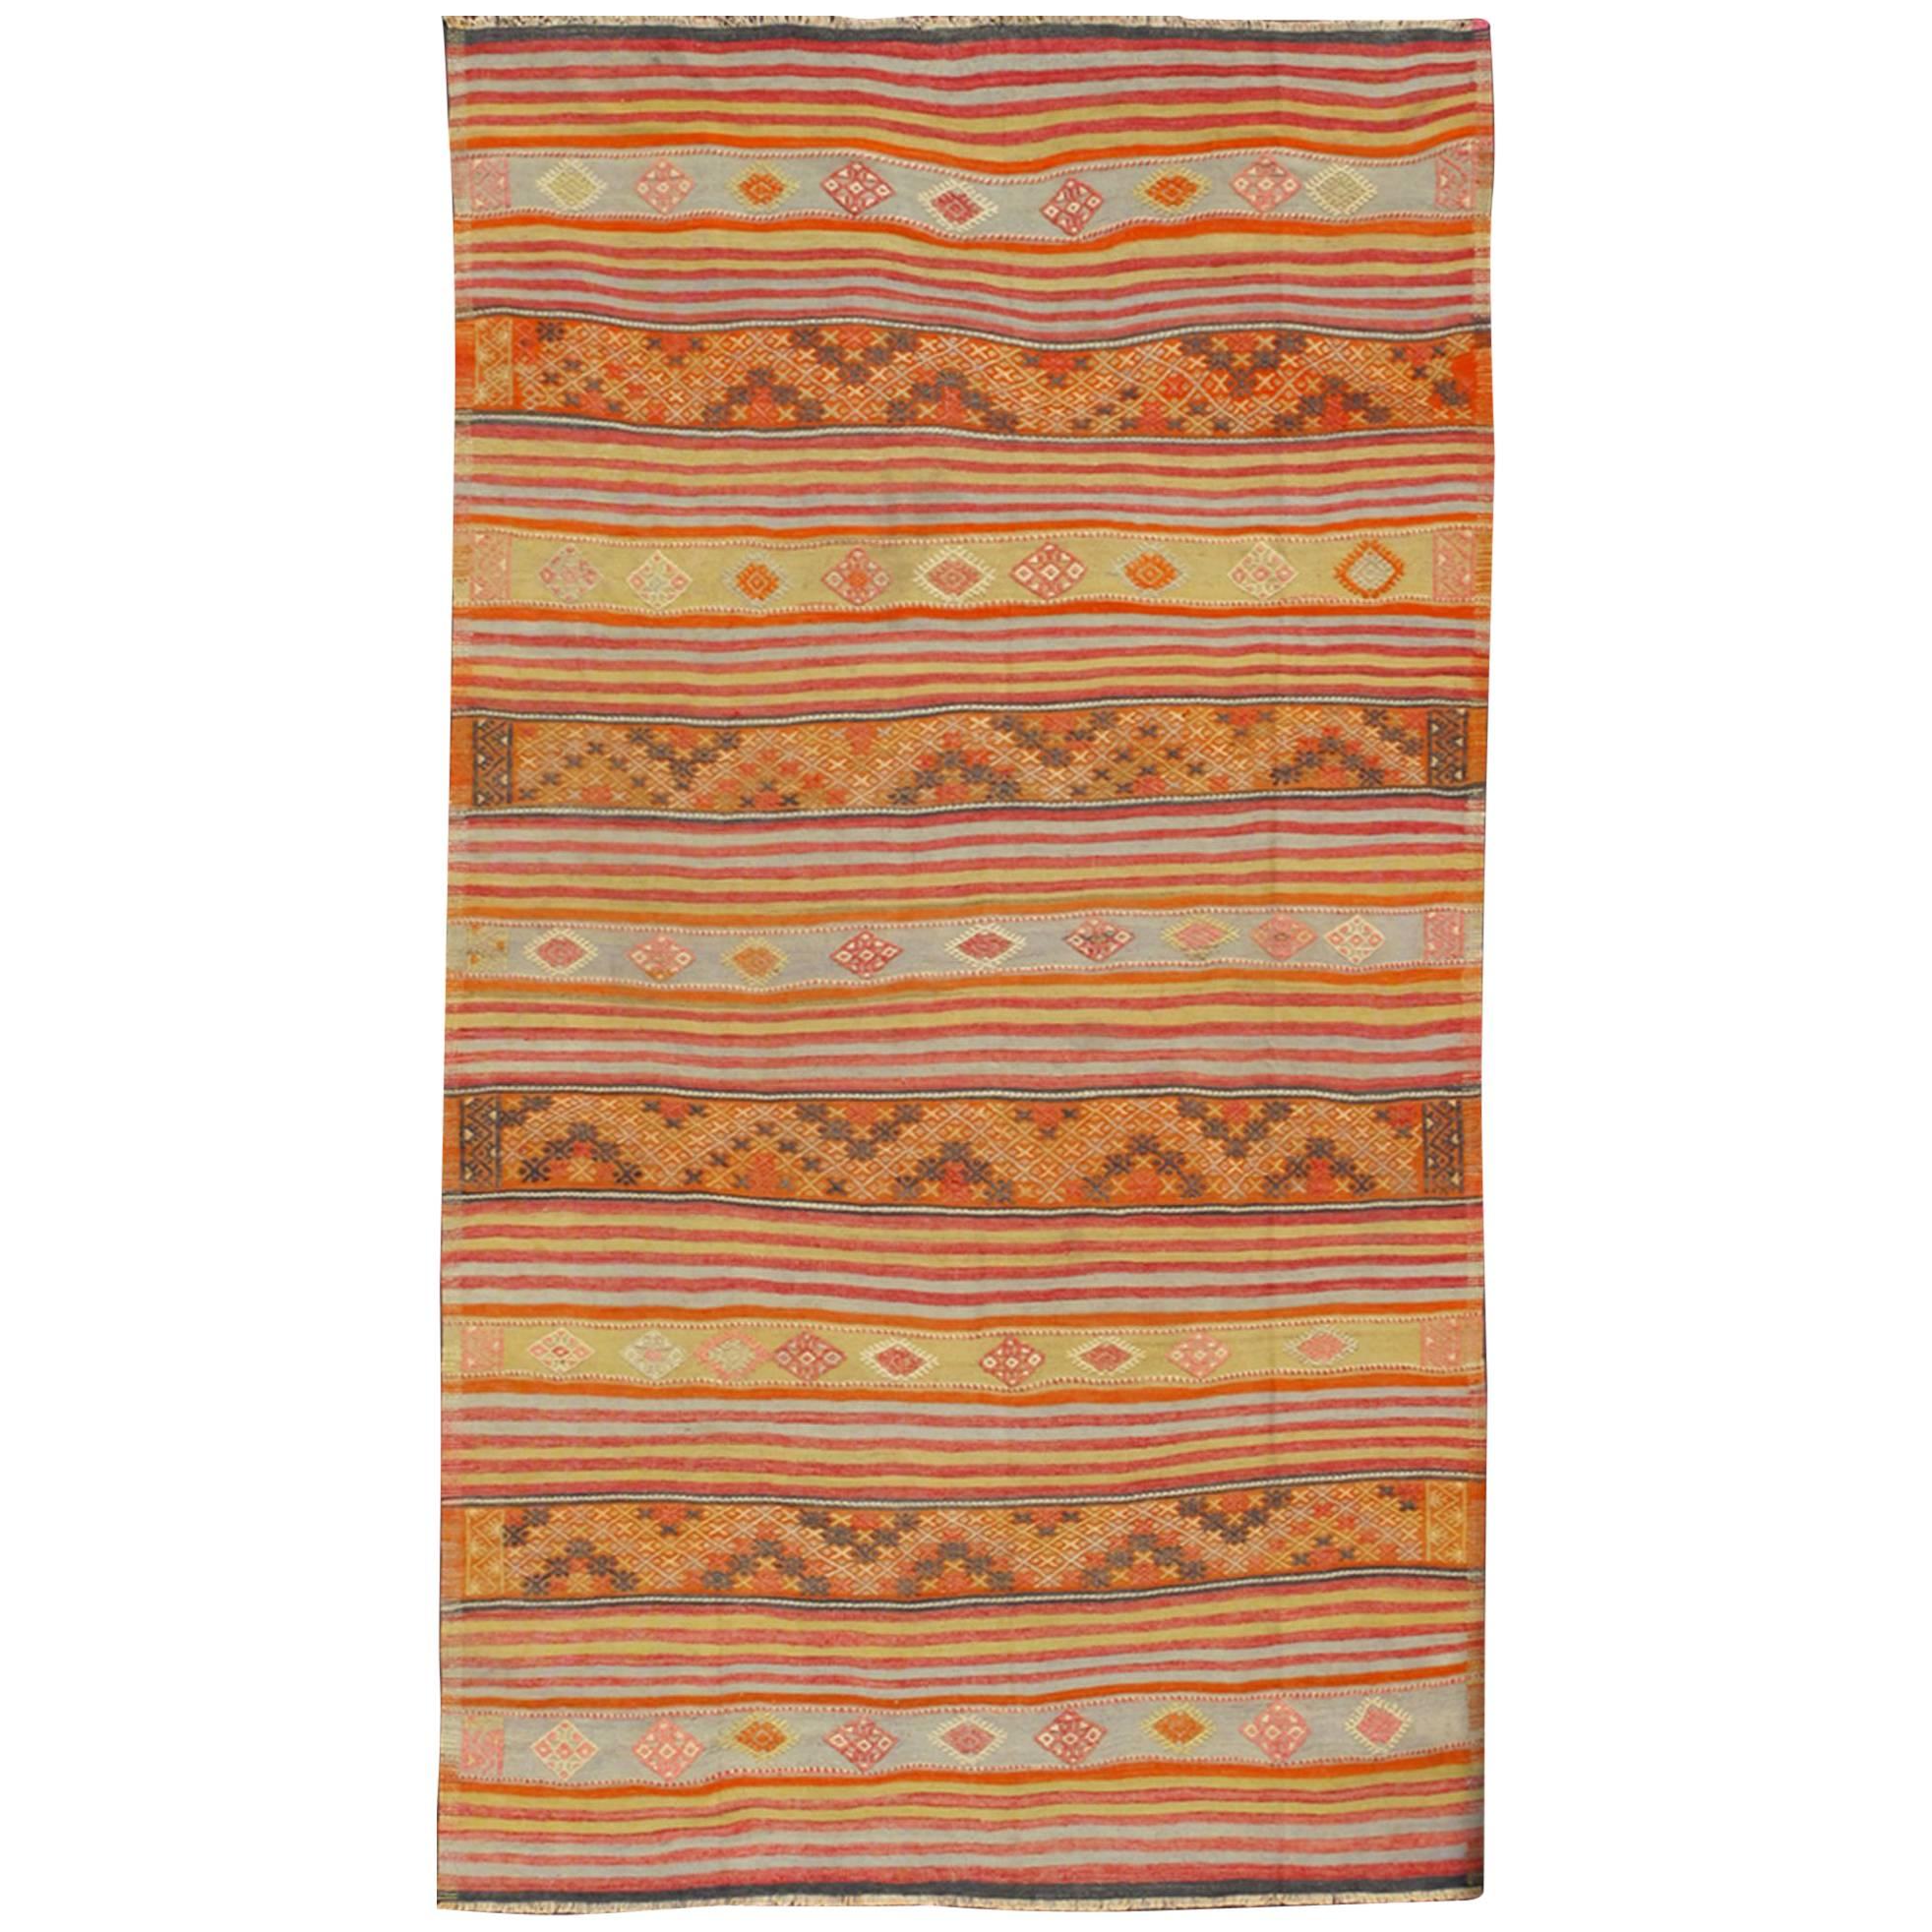 Turkish Kilim Vintage Rug with Assorted Stripe Design in a Variety of Colors